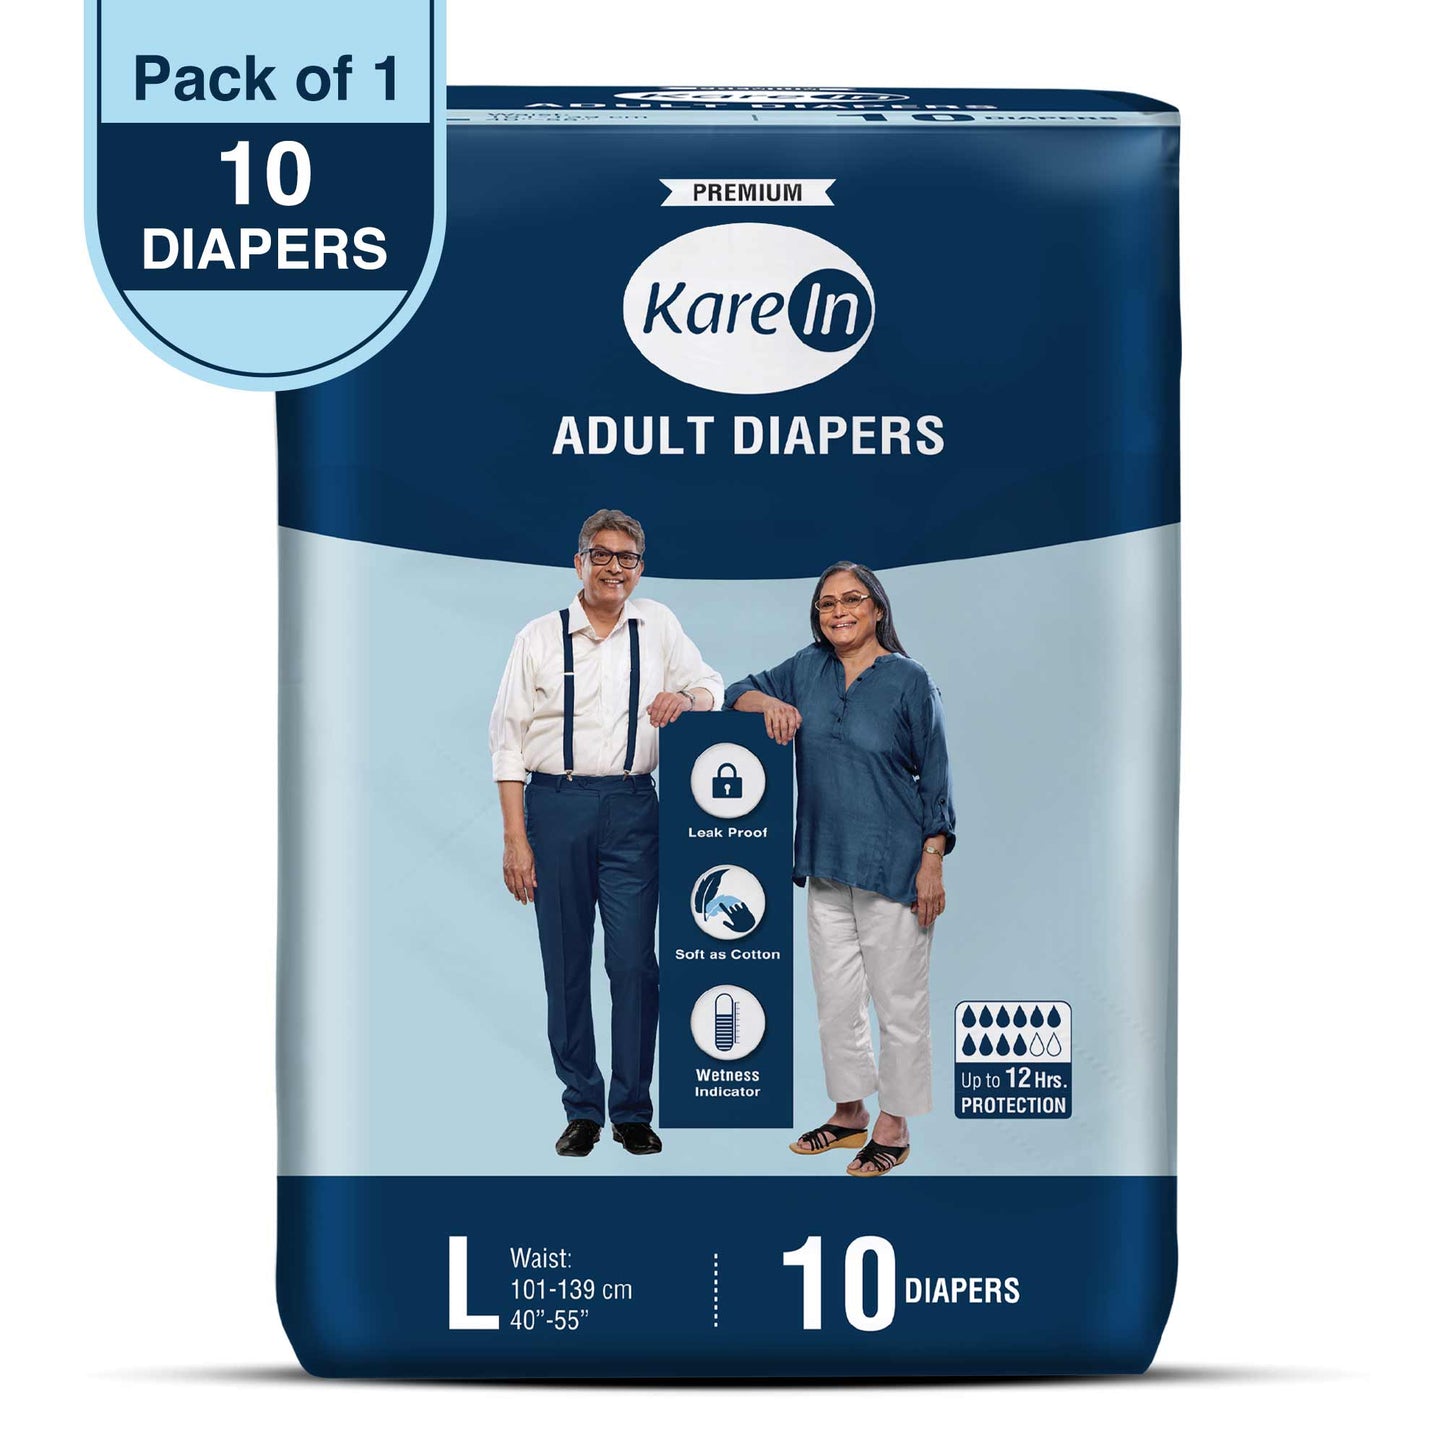 KareIn Premium Adult Diapers, Large, Waist Size 101-139 Cm (40"-55"), Tape Style, Unisex, High Absorbency, Leak Proof, Wetness Indicator, 10 diapers